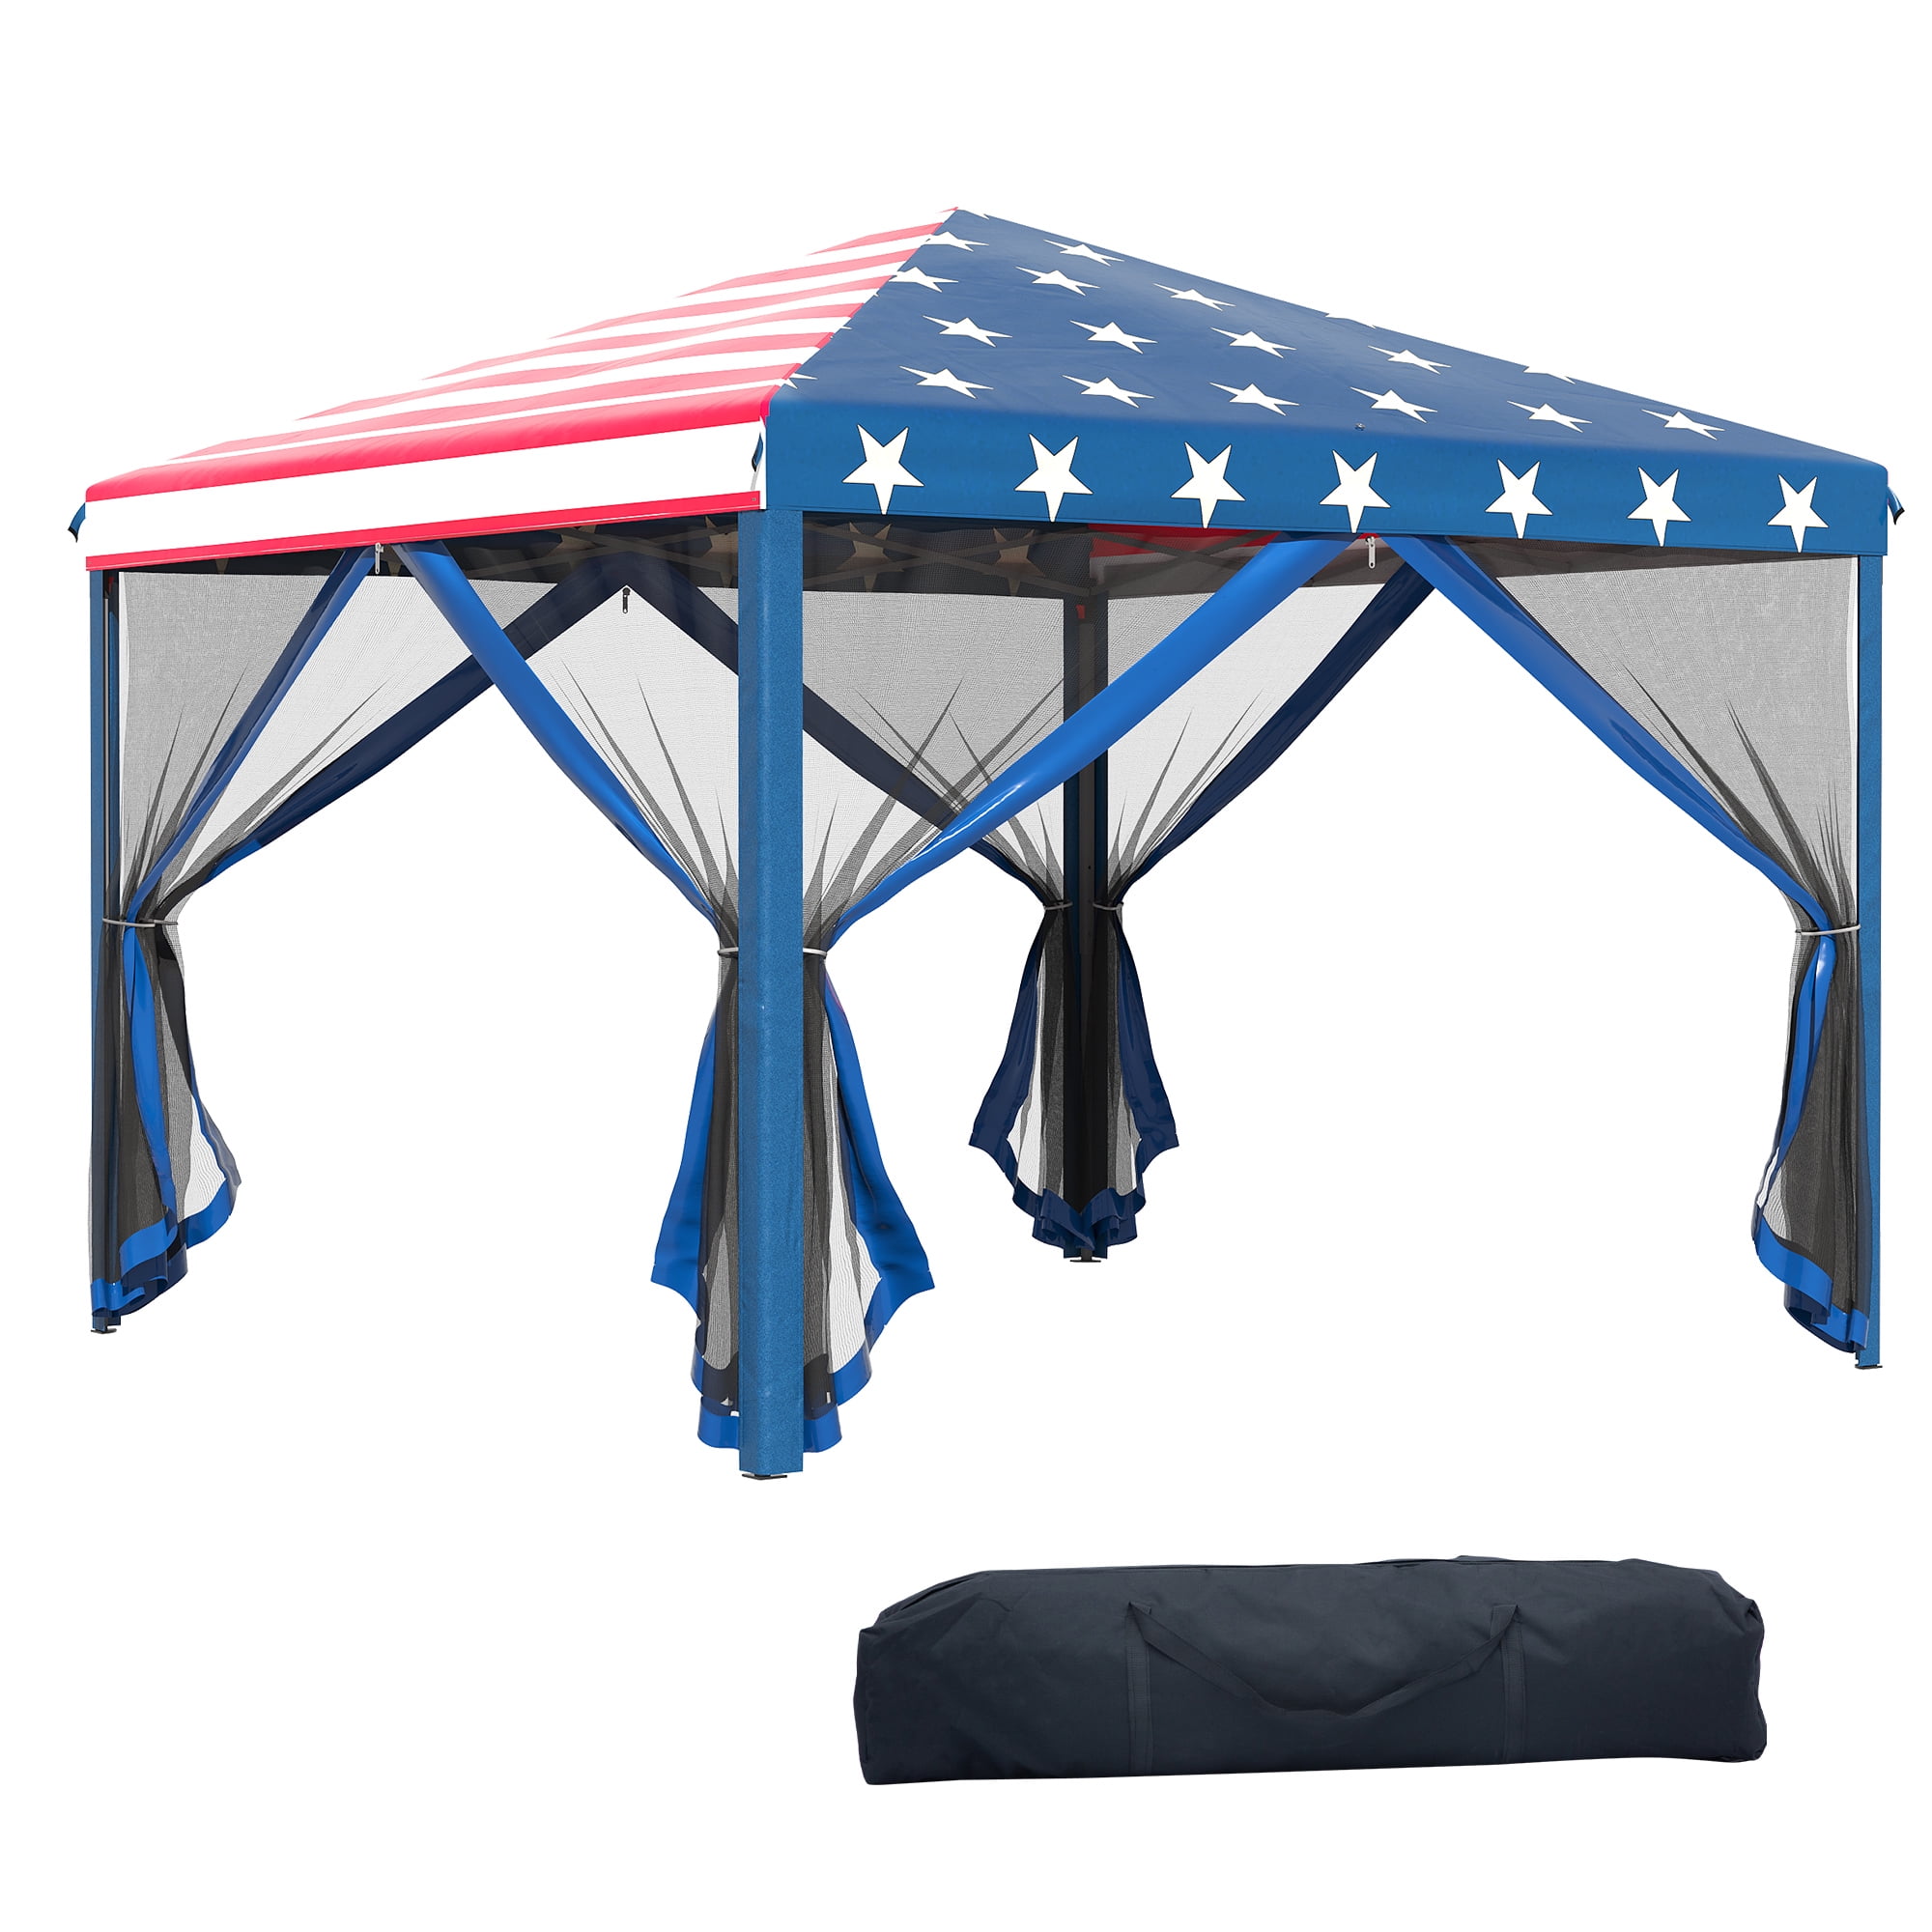 ontwikkeling Verleiding Van God Outsunny 10' x 10' Pop-Up Canopy Shelter Party Tent with Mesh Walls -  American Flag - Walmart.com